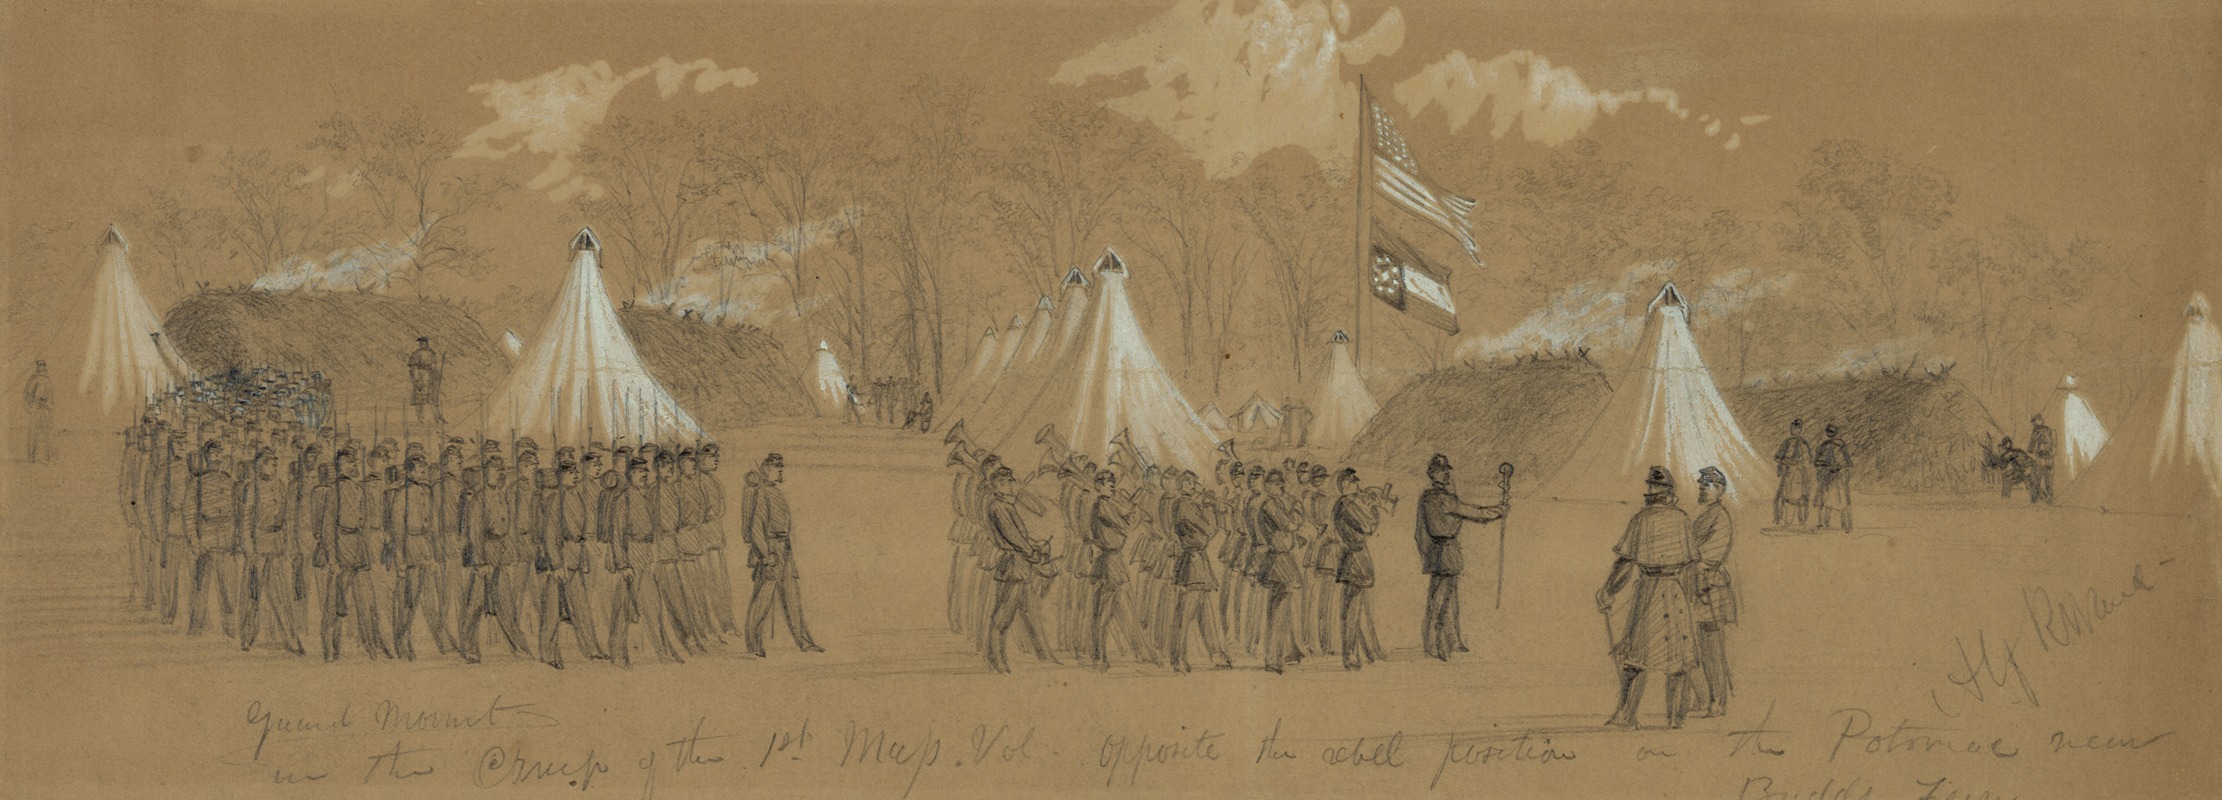 Alfred Rudolph Waud - Guard Mount in the Camp of the 1st Mass. Vol. Opposite the rebel position on the Potomac near Budds Ferry